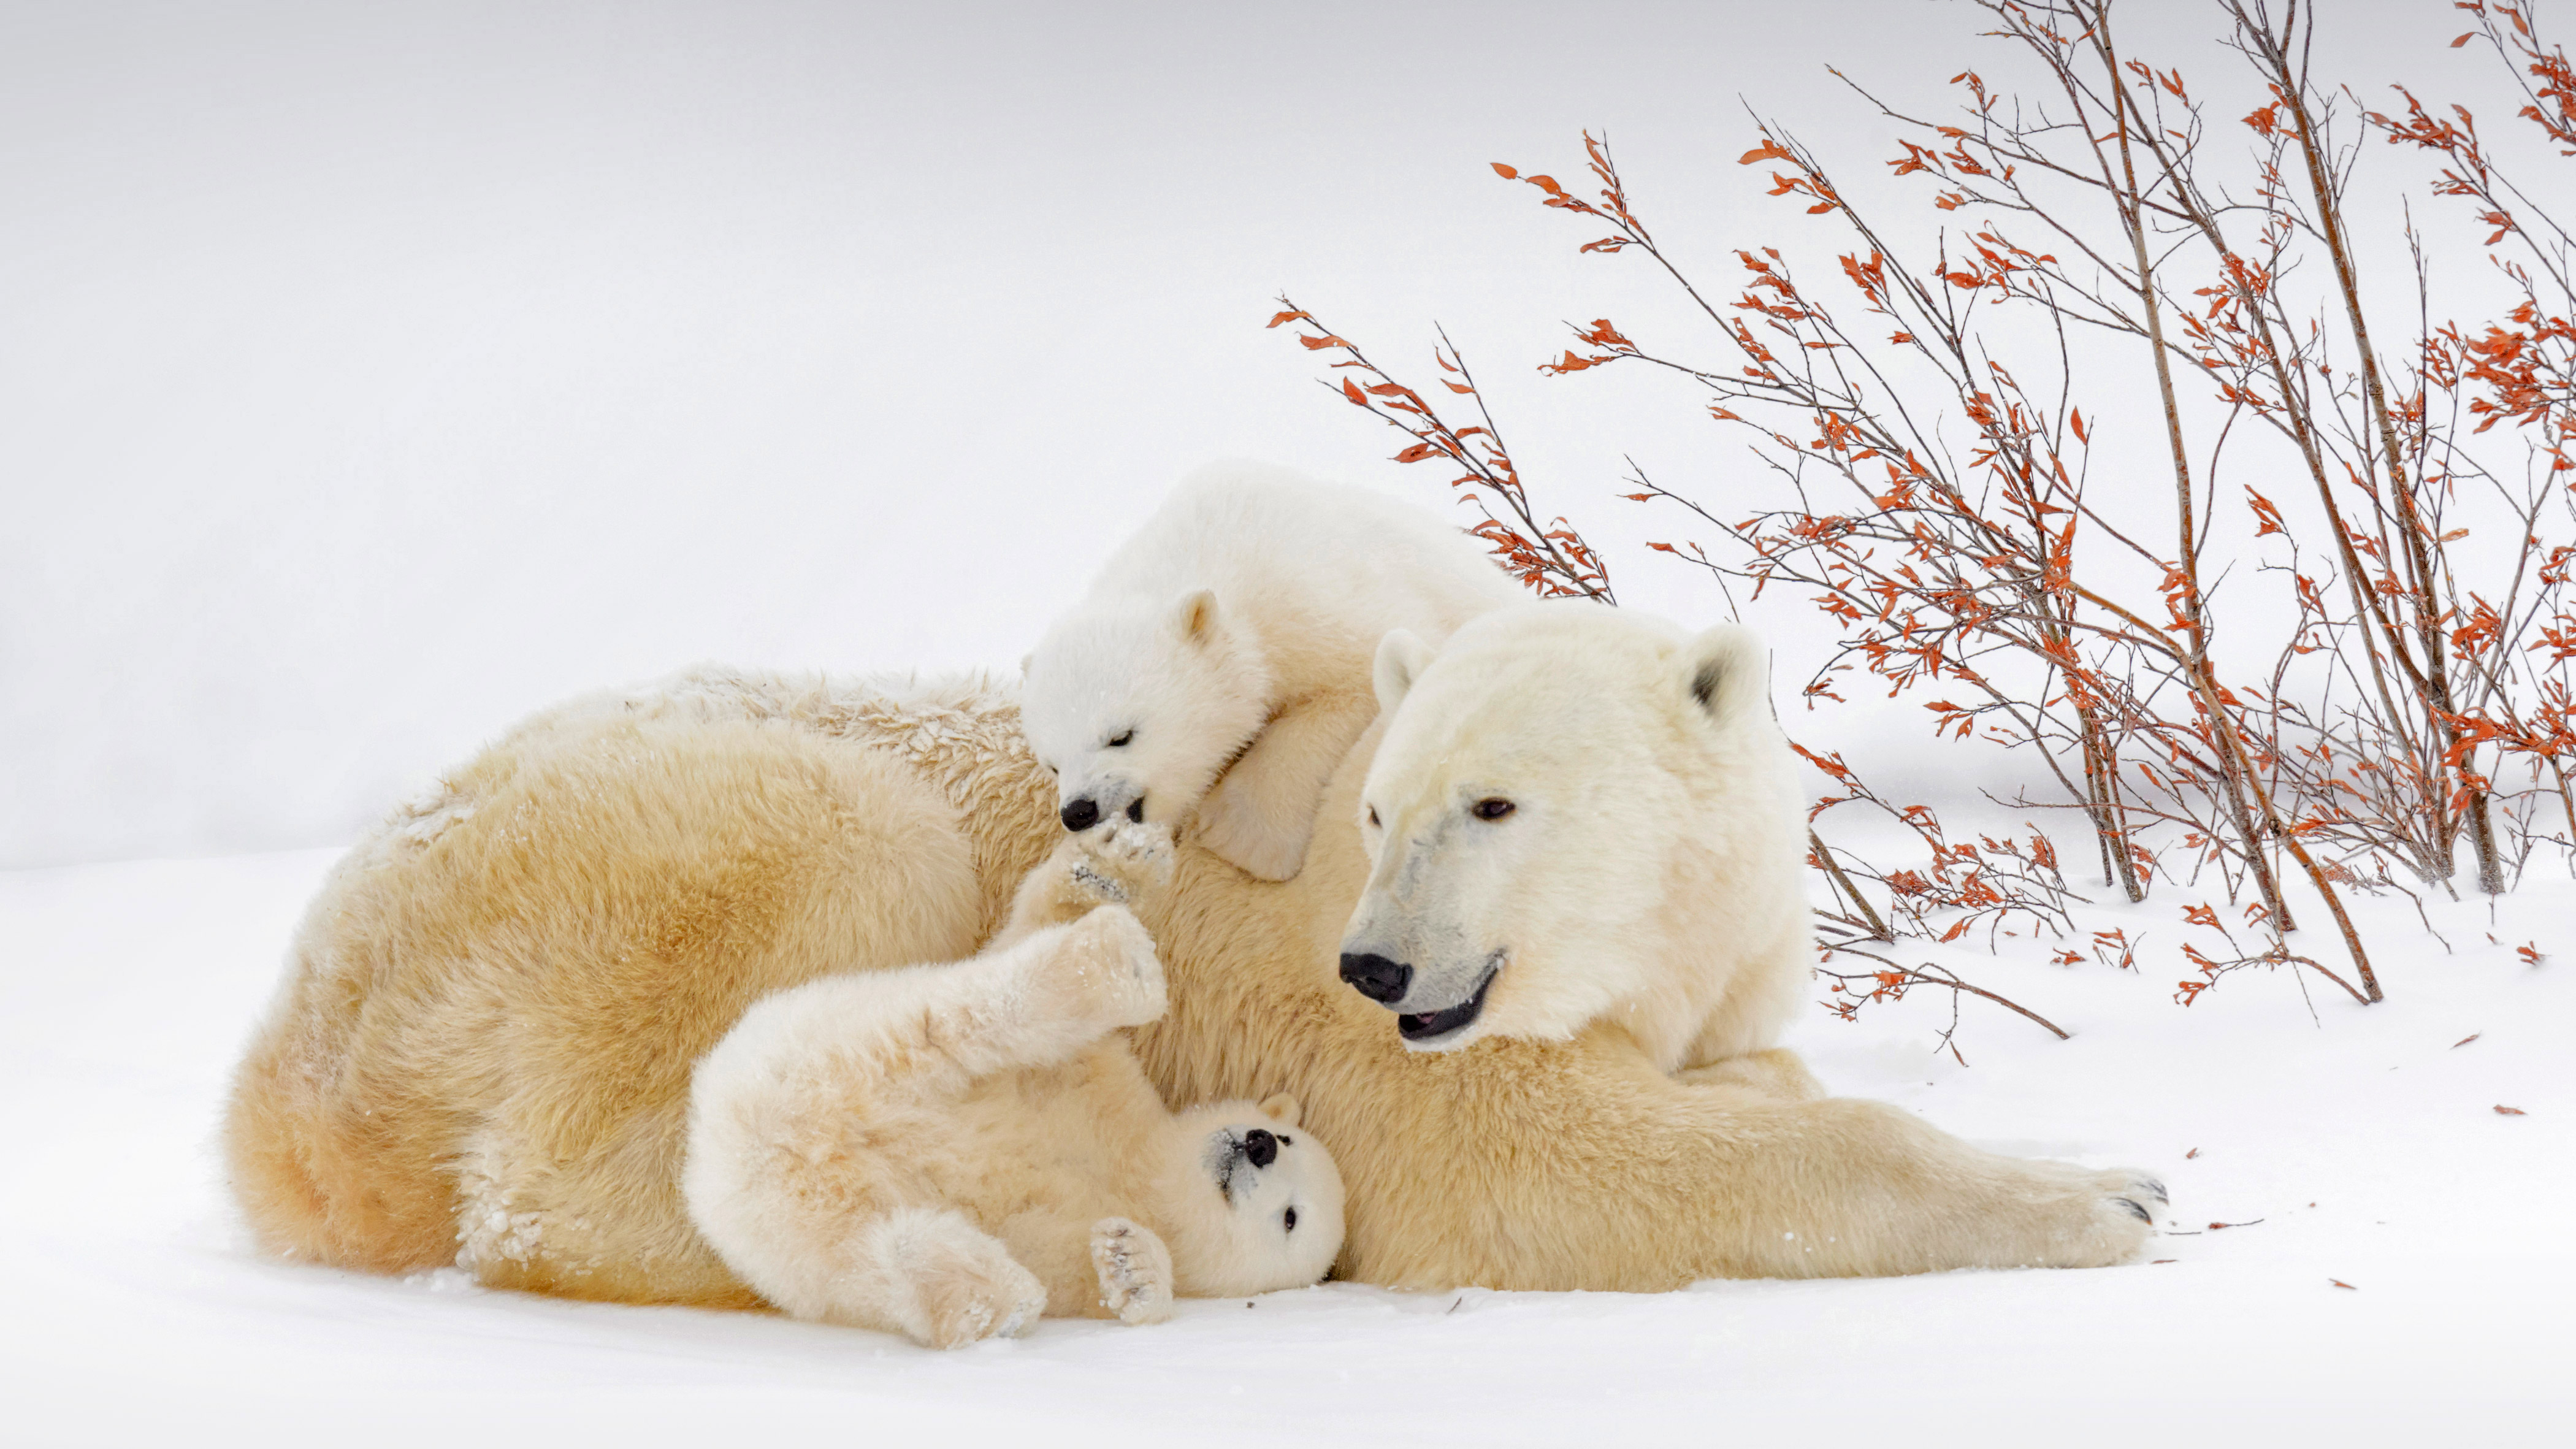 Polar bear mother with cubs in Wapusk National Park, Manitoba, Canada by Andre Gilden